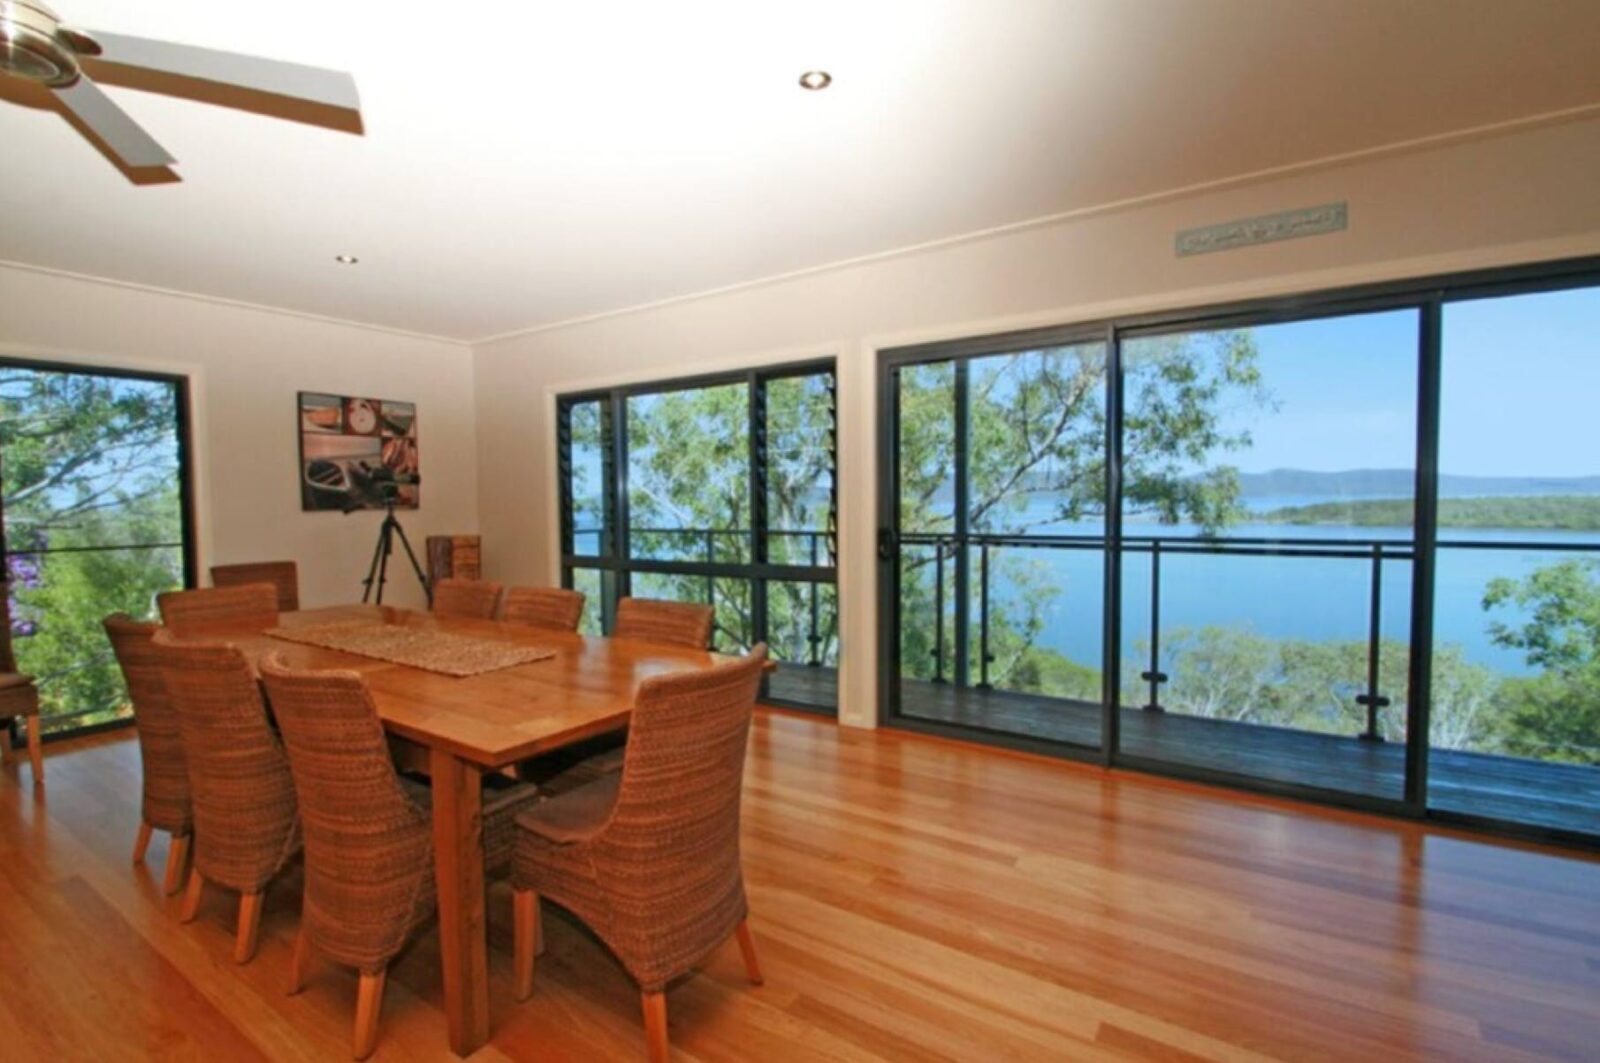 Dining room with 8 seater setting, ceiling fan and ocean views